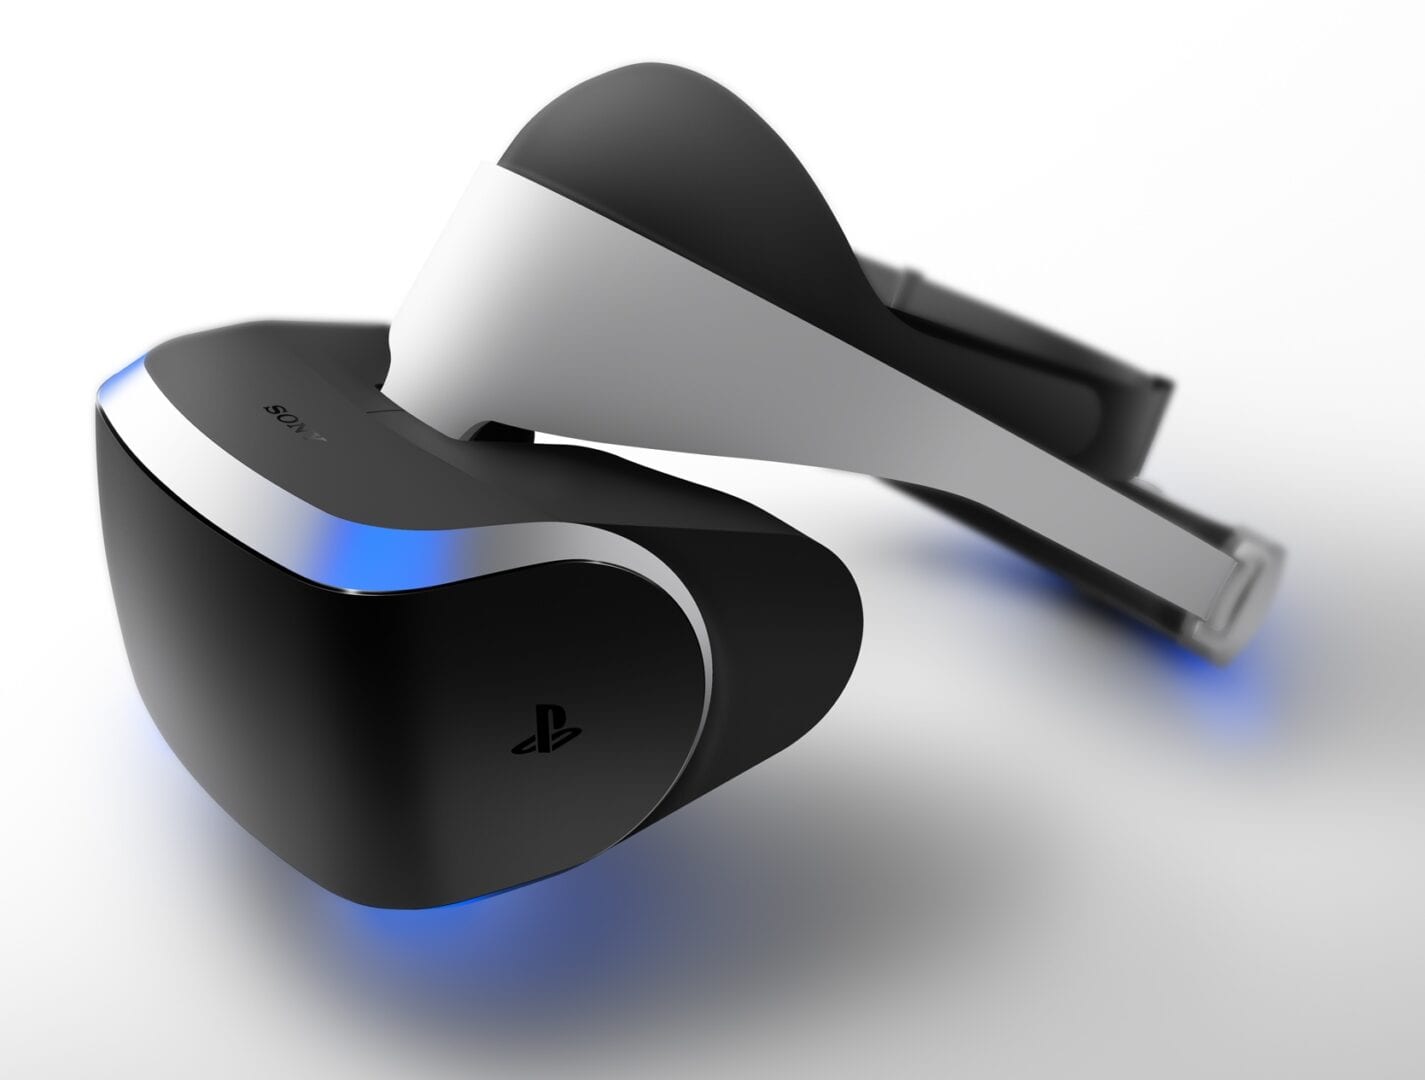 Sony San Diego "Intimately Involved" With PS VR, Hasn't Discounted Vita Support Yet